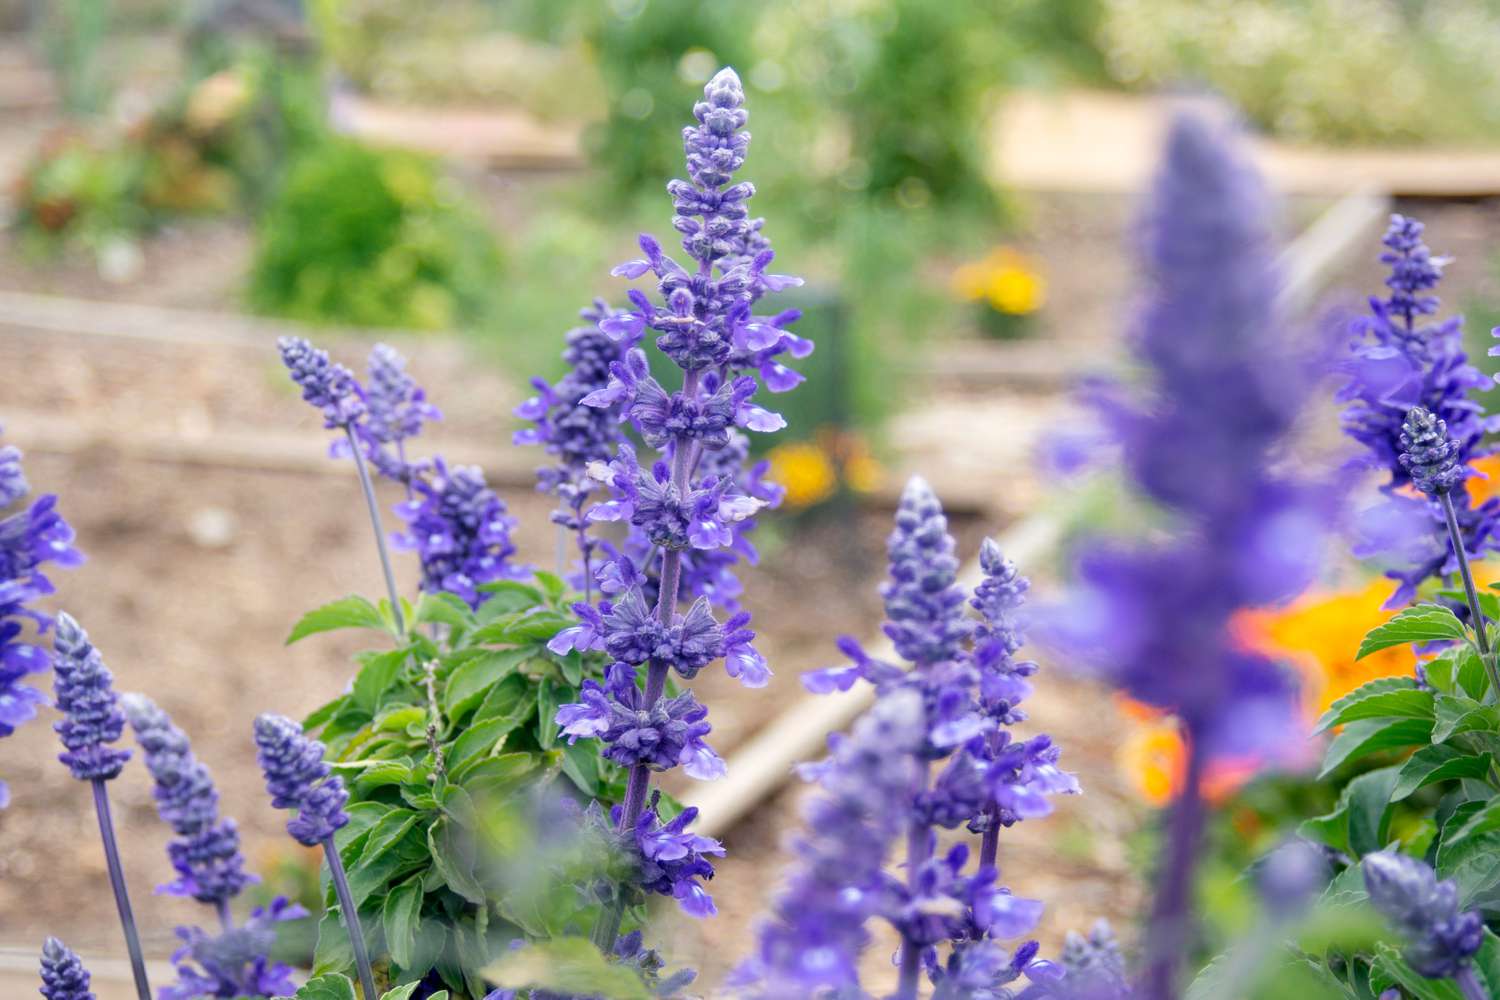 Victoria blue salvia plant with purple flower spikes growing in garden